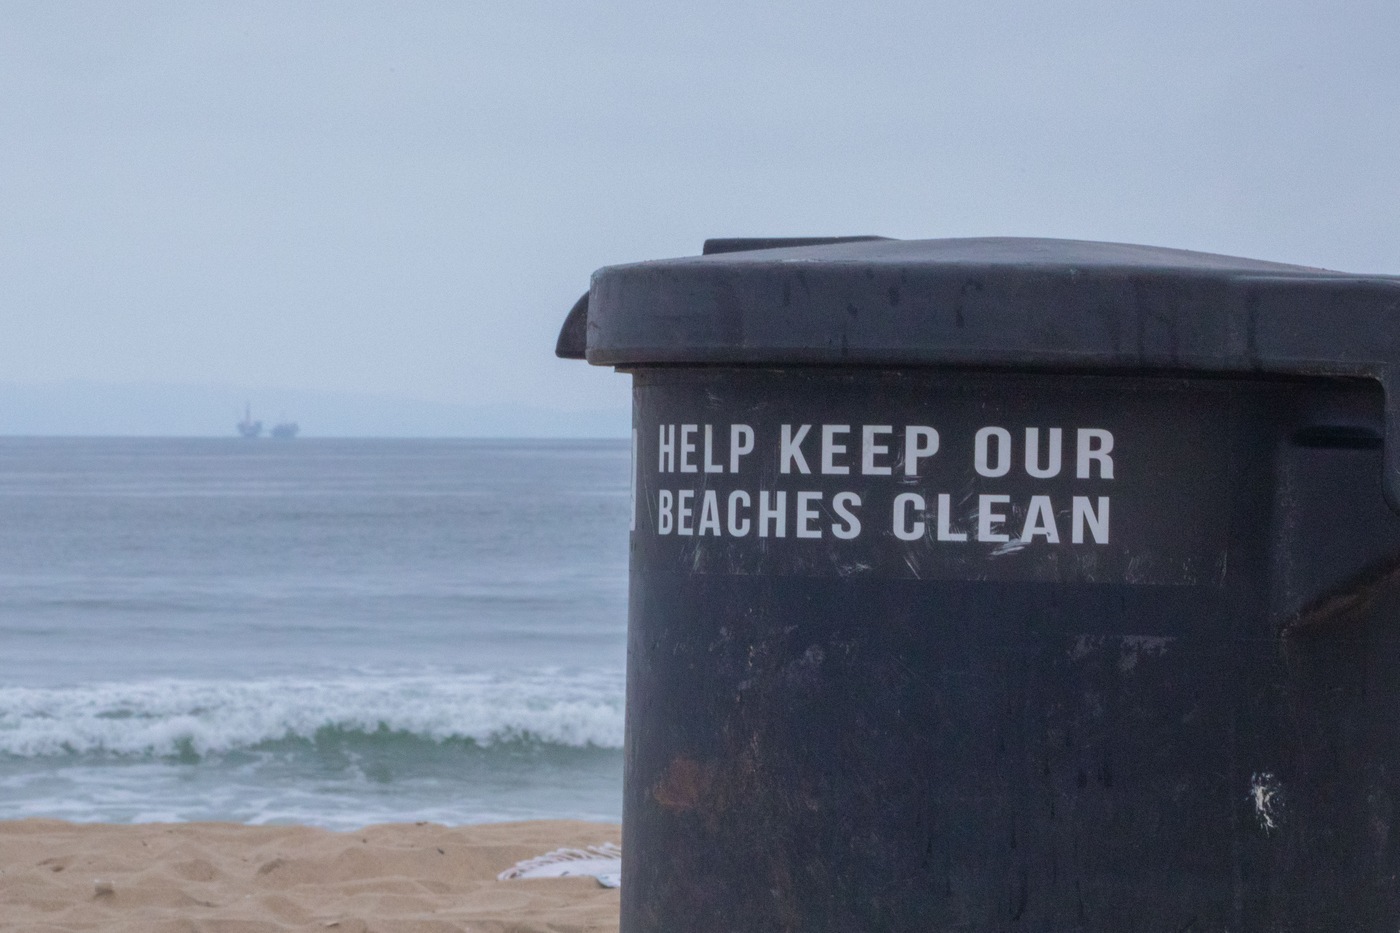 A waste disposal container at Huntington Beach with "Keep Our Beaches Clean" posted on it. In the distance, an oil rig can be seen.